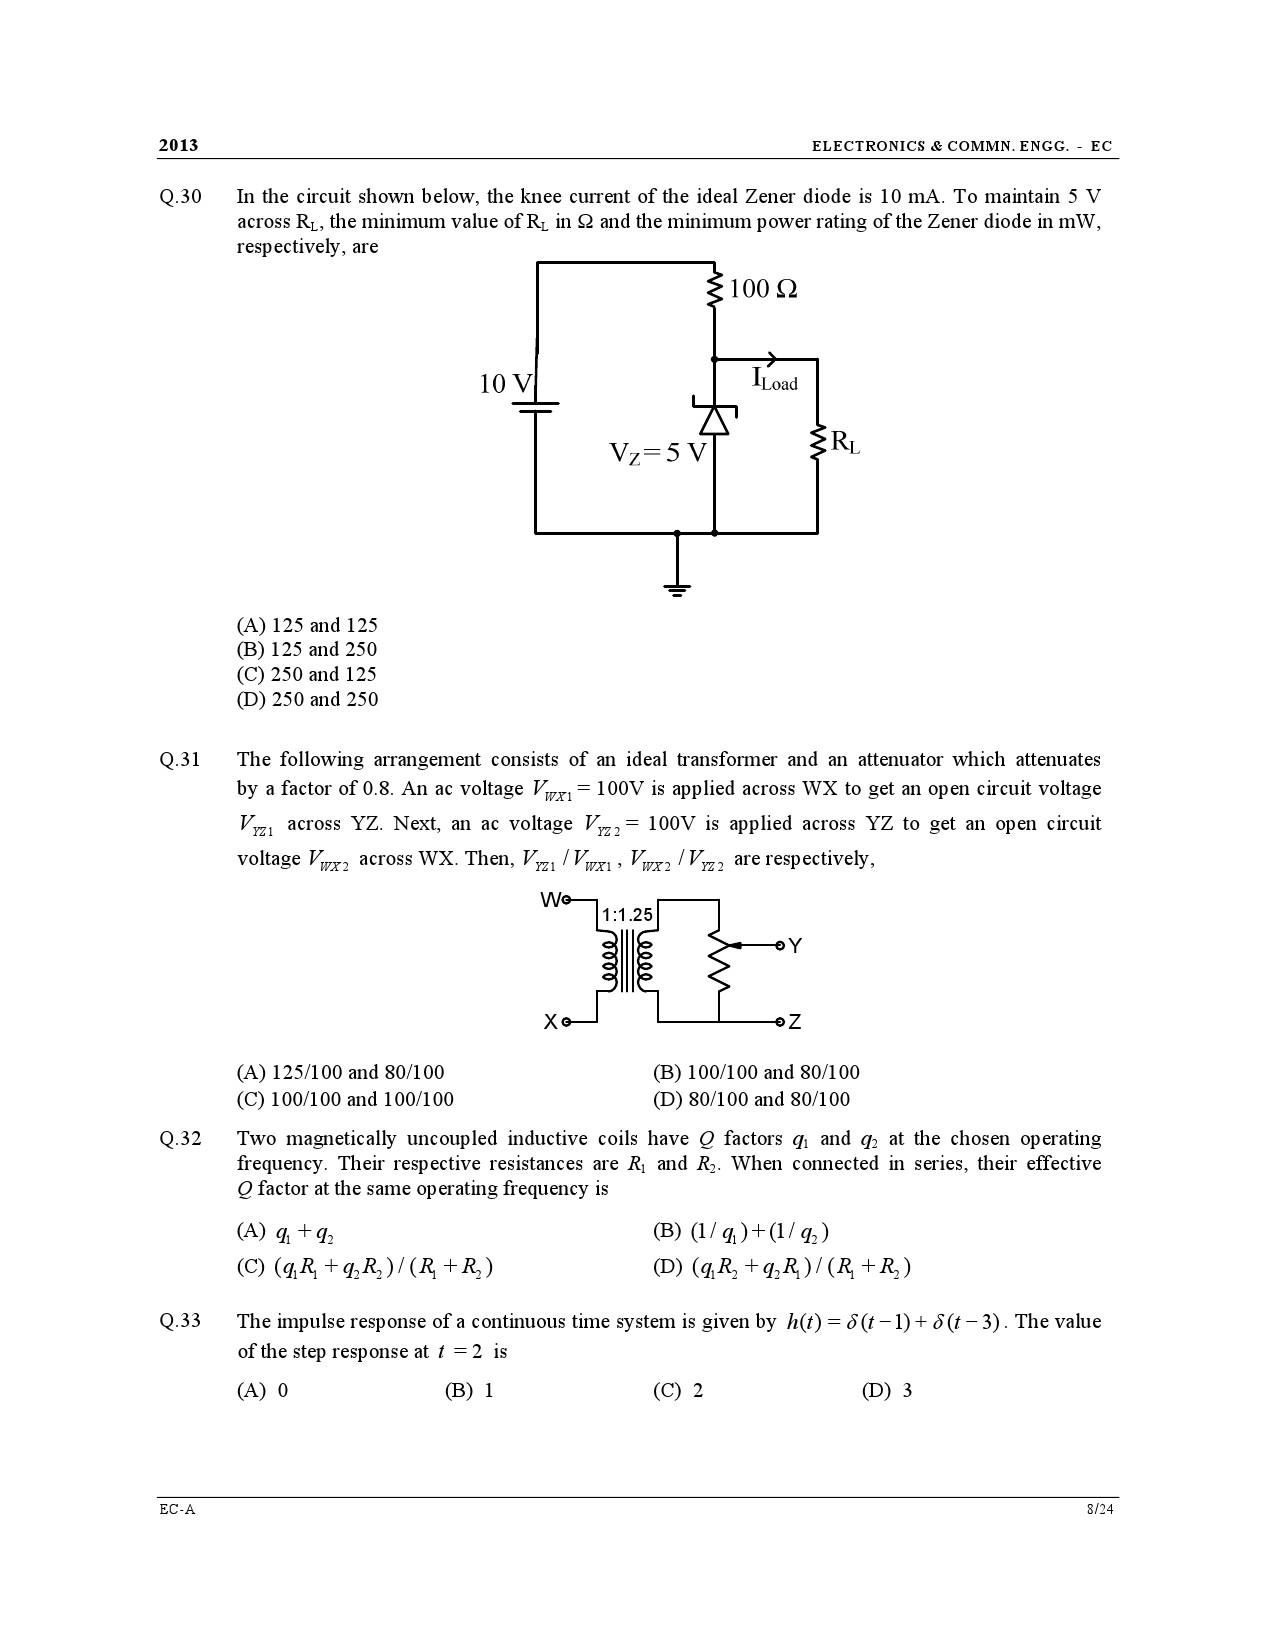 GATE Exam Question Paper 2013 Electronics and Communication Engineering 8